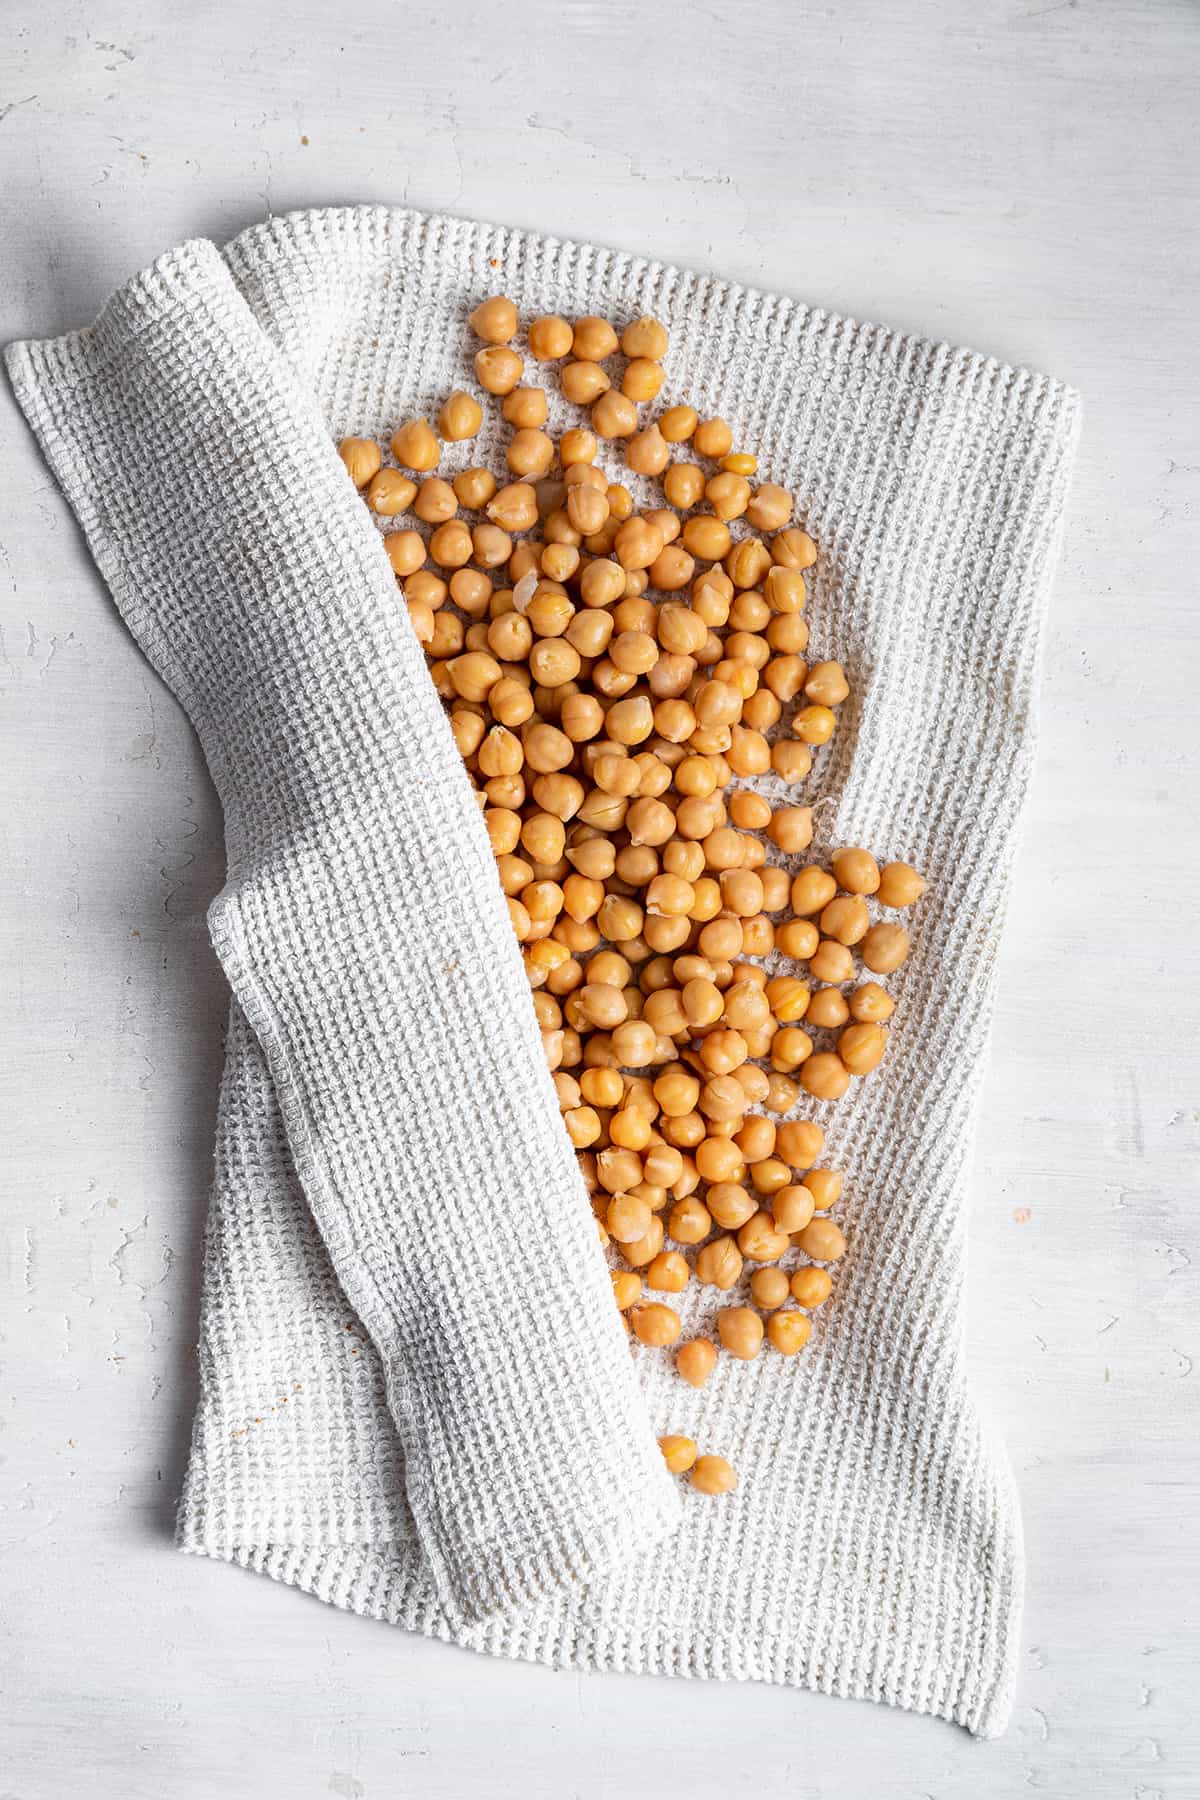 Chickpeas in.a towel getting dried off